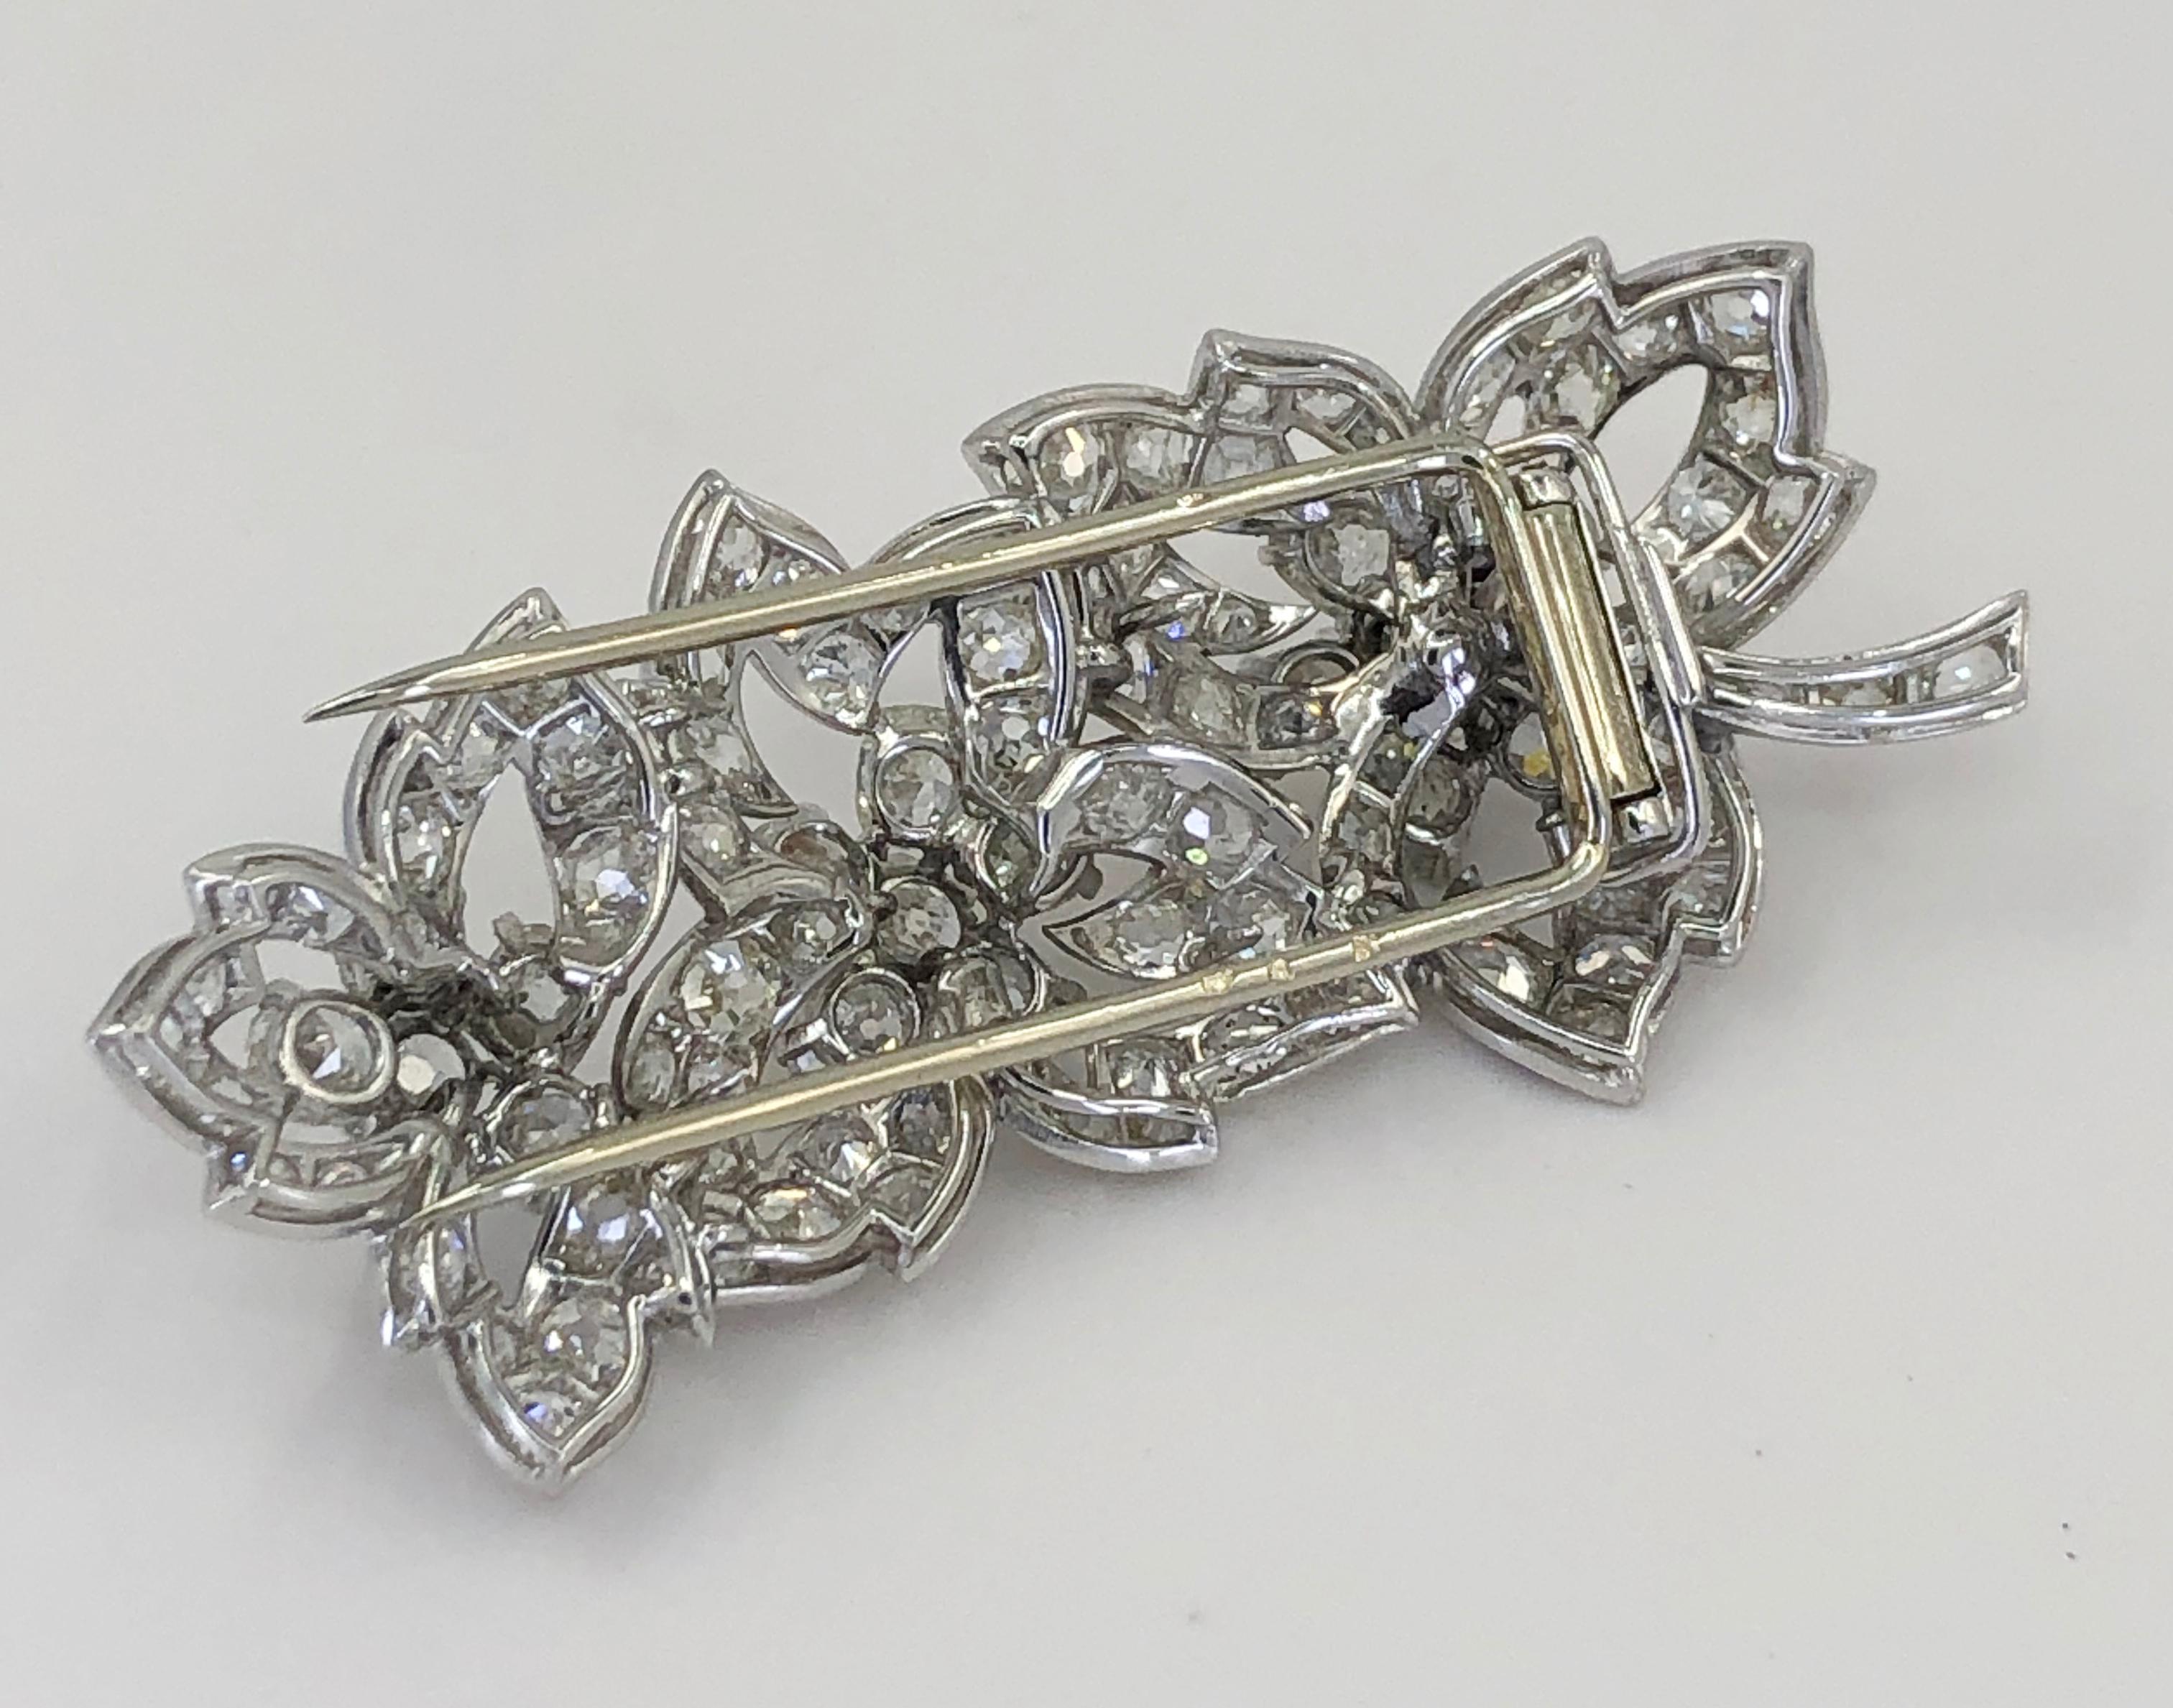 Cartier Paris Vintage 1950s Diamond Stylized Floral Pin

A fine signed “Cartier”; circa 1950s platinum brooch, designed as three leaves, set with cushion-shaped and round diamonds.
Large diamond weight is approx. 1.0 ct. G-H VS and the total diamond